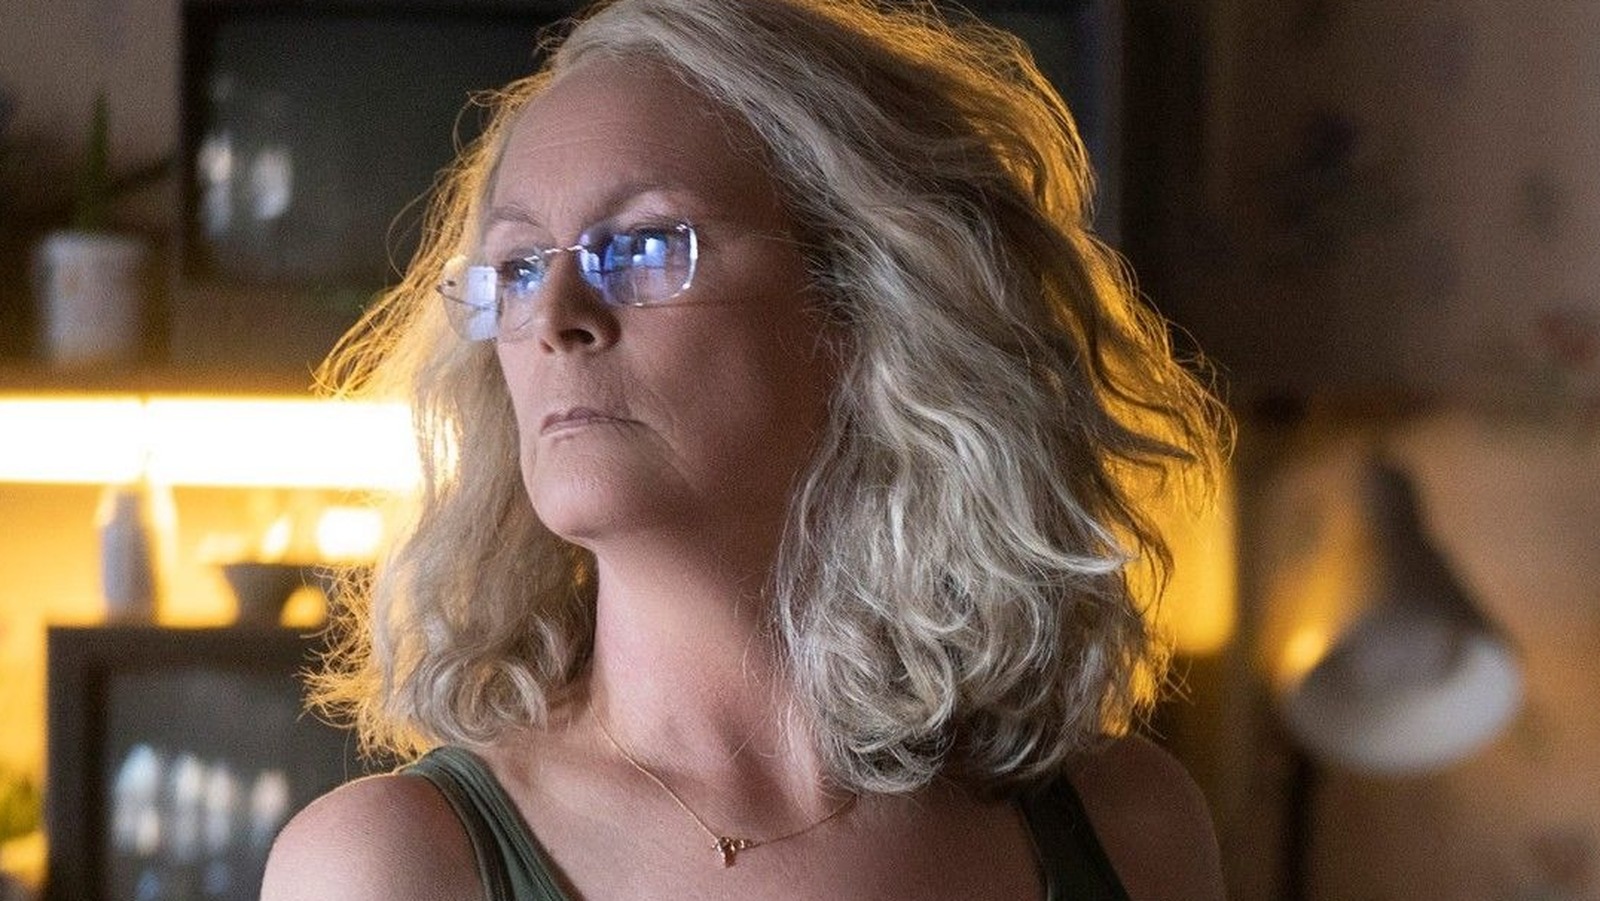 Jamie Lee Curtis' Best Movie And TV Roles To Date